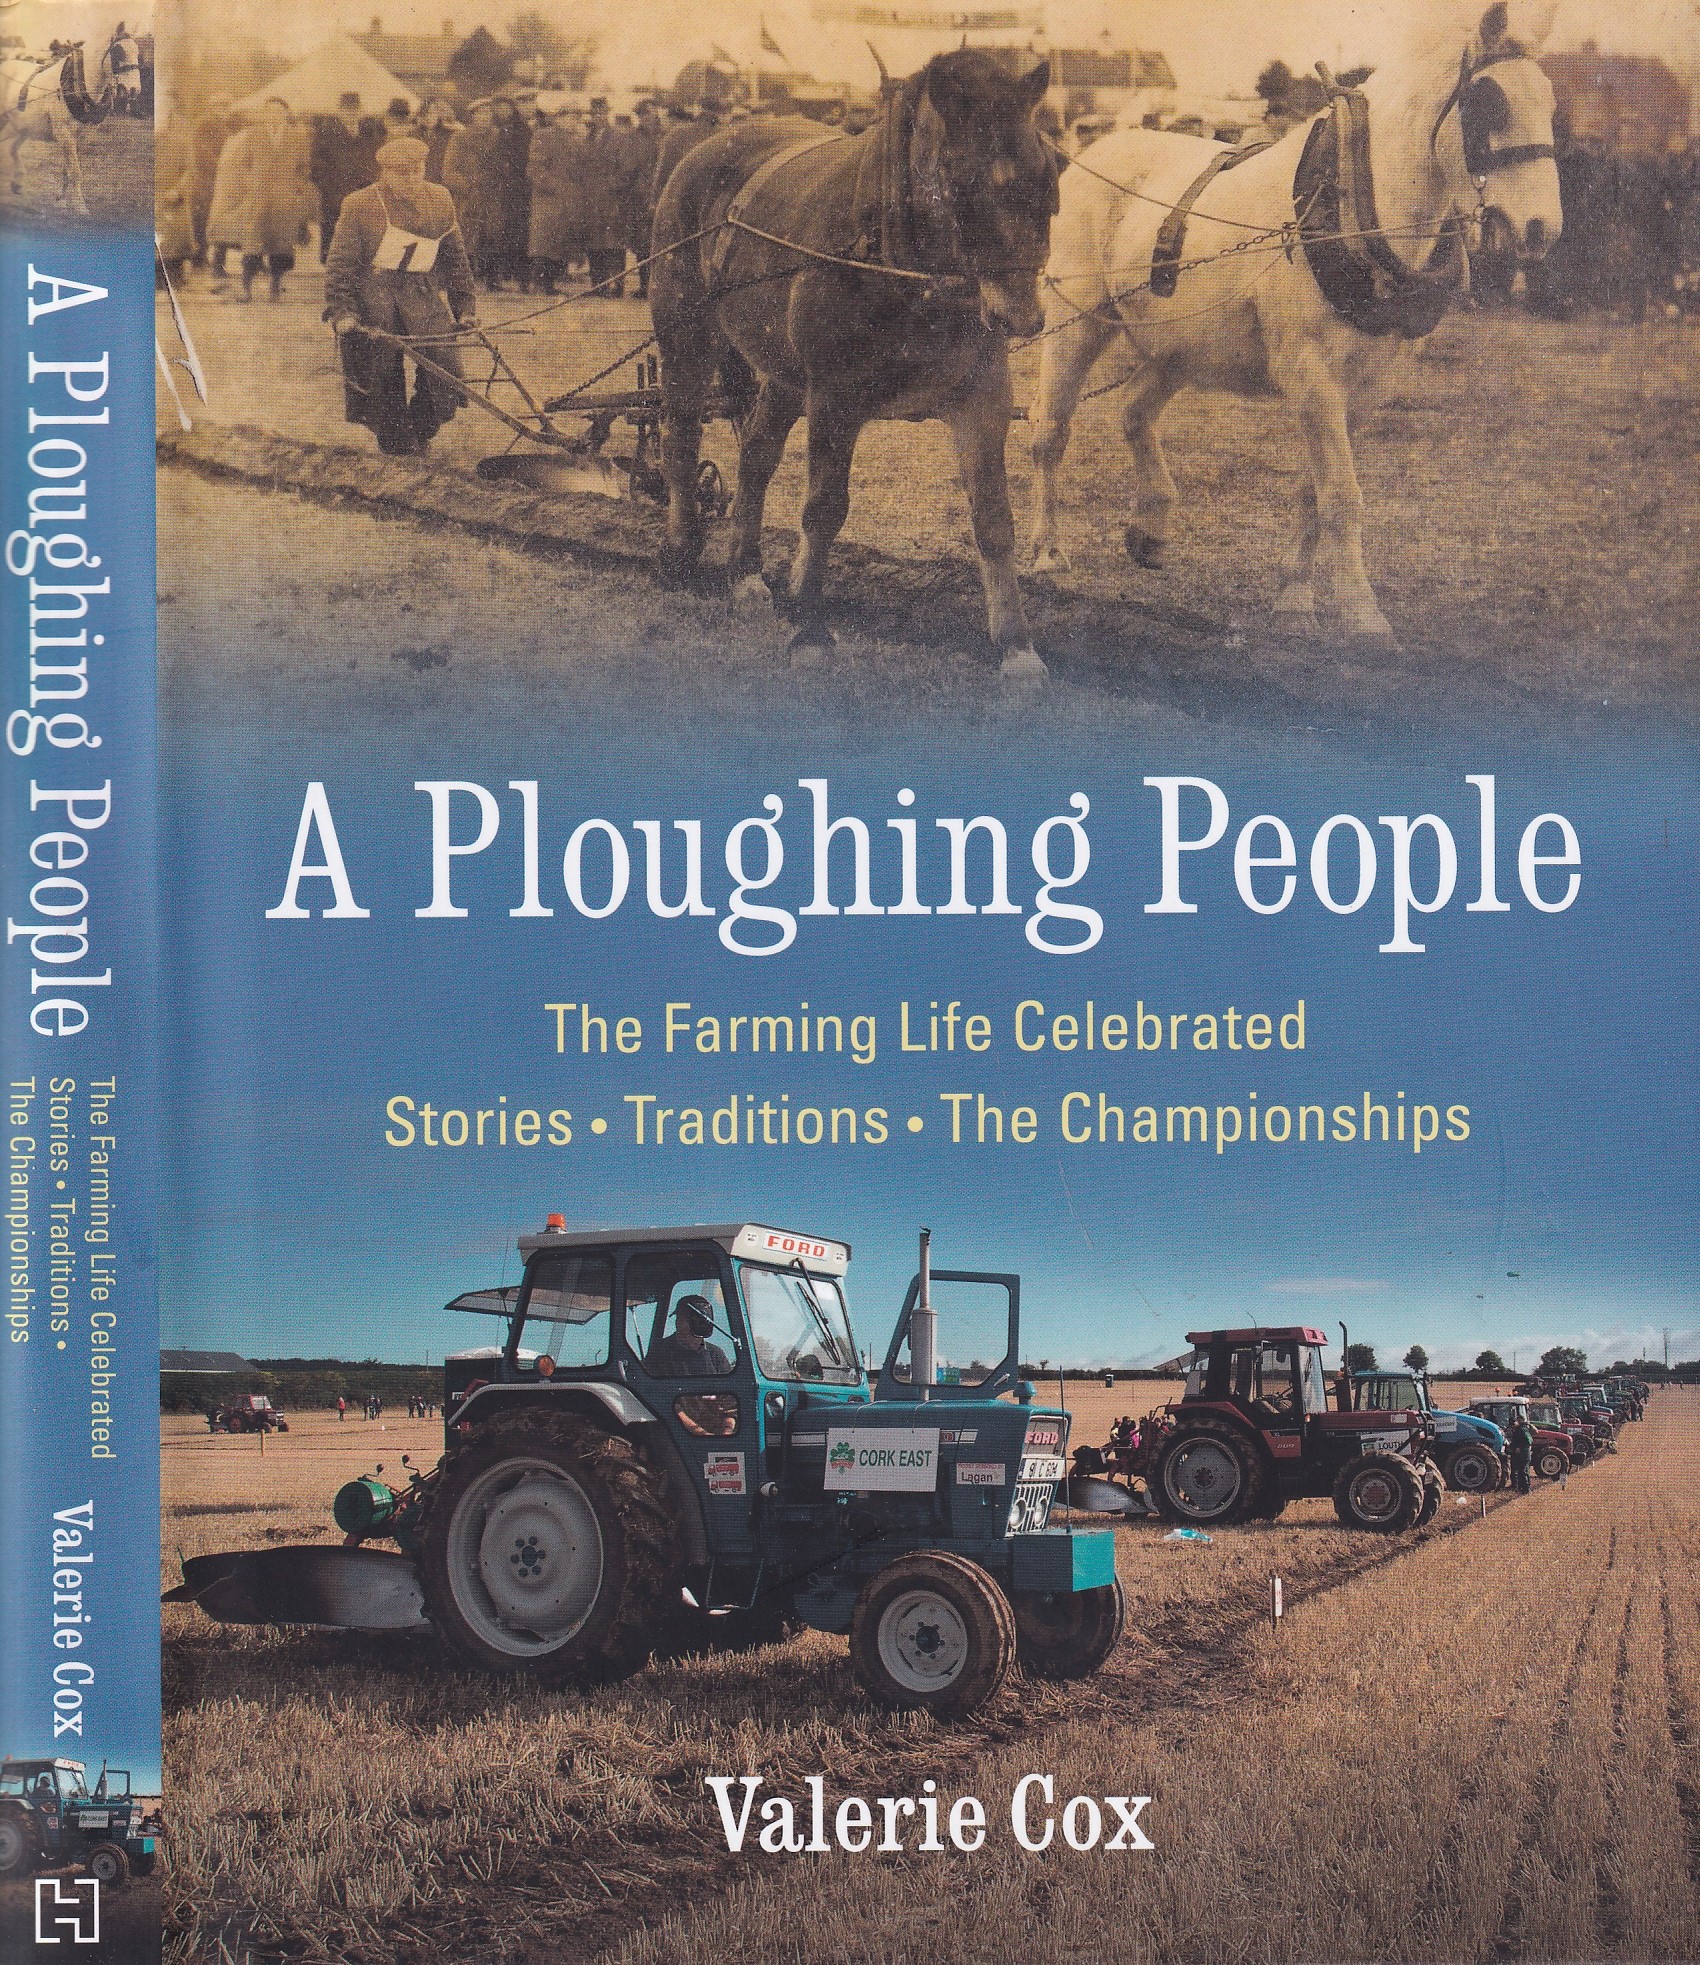 A Ploughing People: The Farming Life Celebrated – Stories, Traditions, The Championships | Valerie Cox | Charlie Byrne's